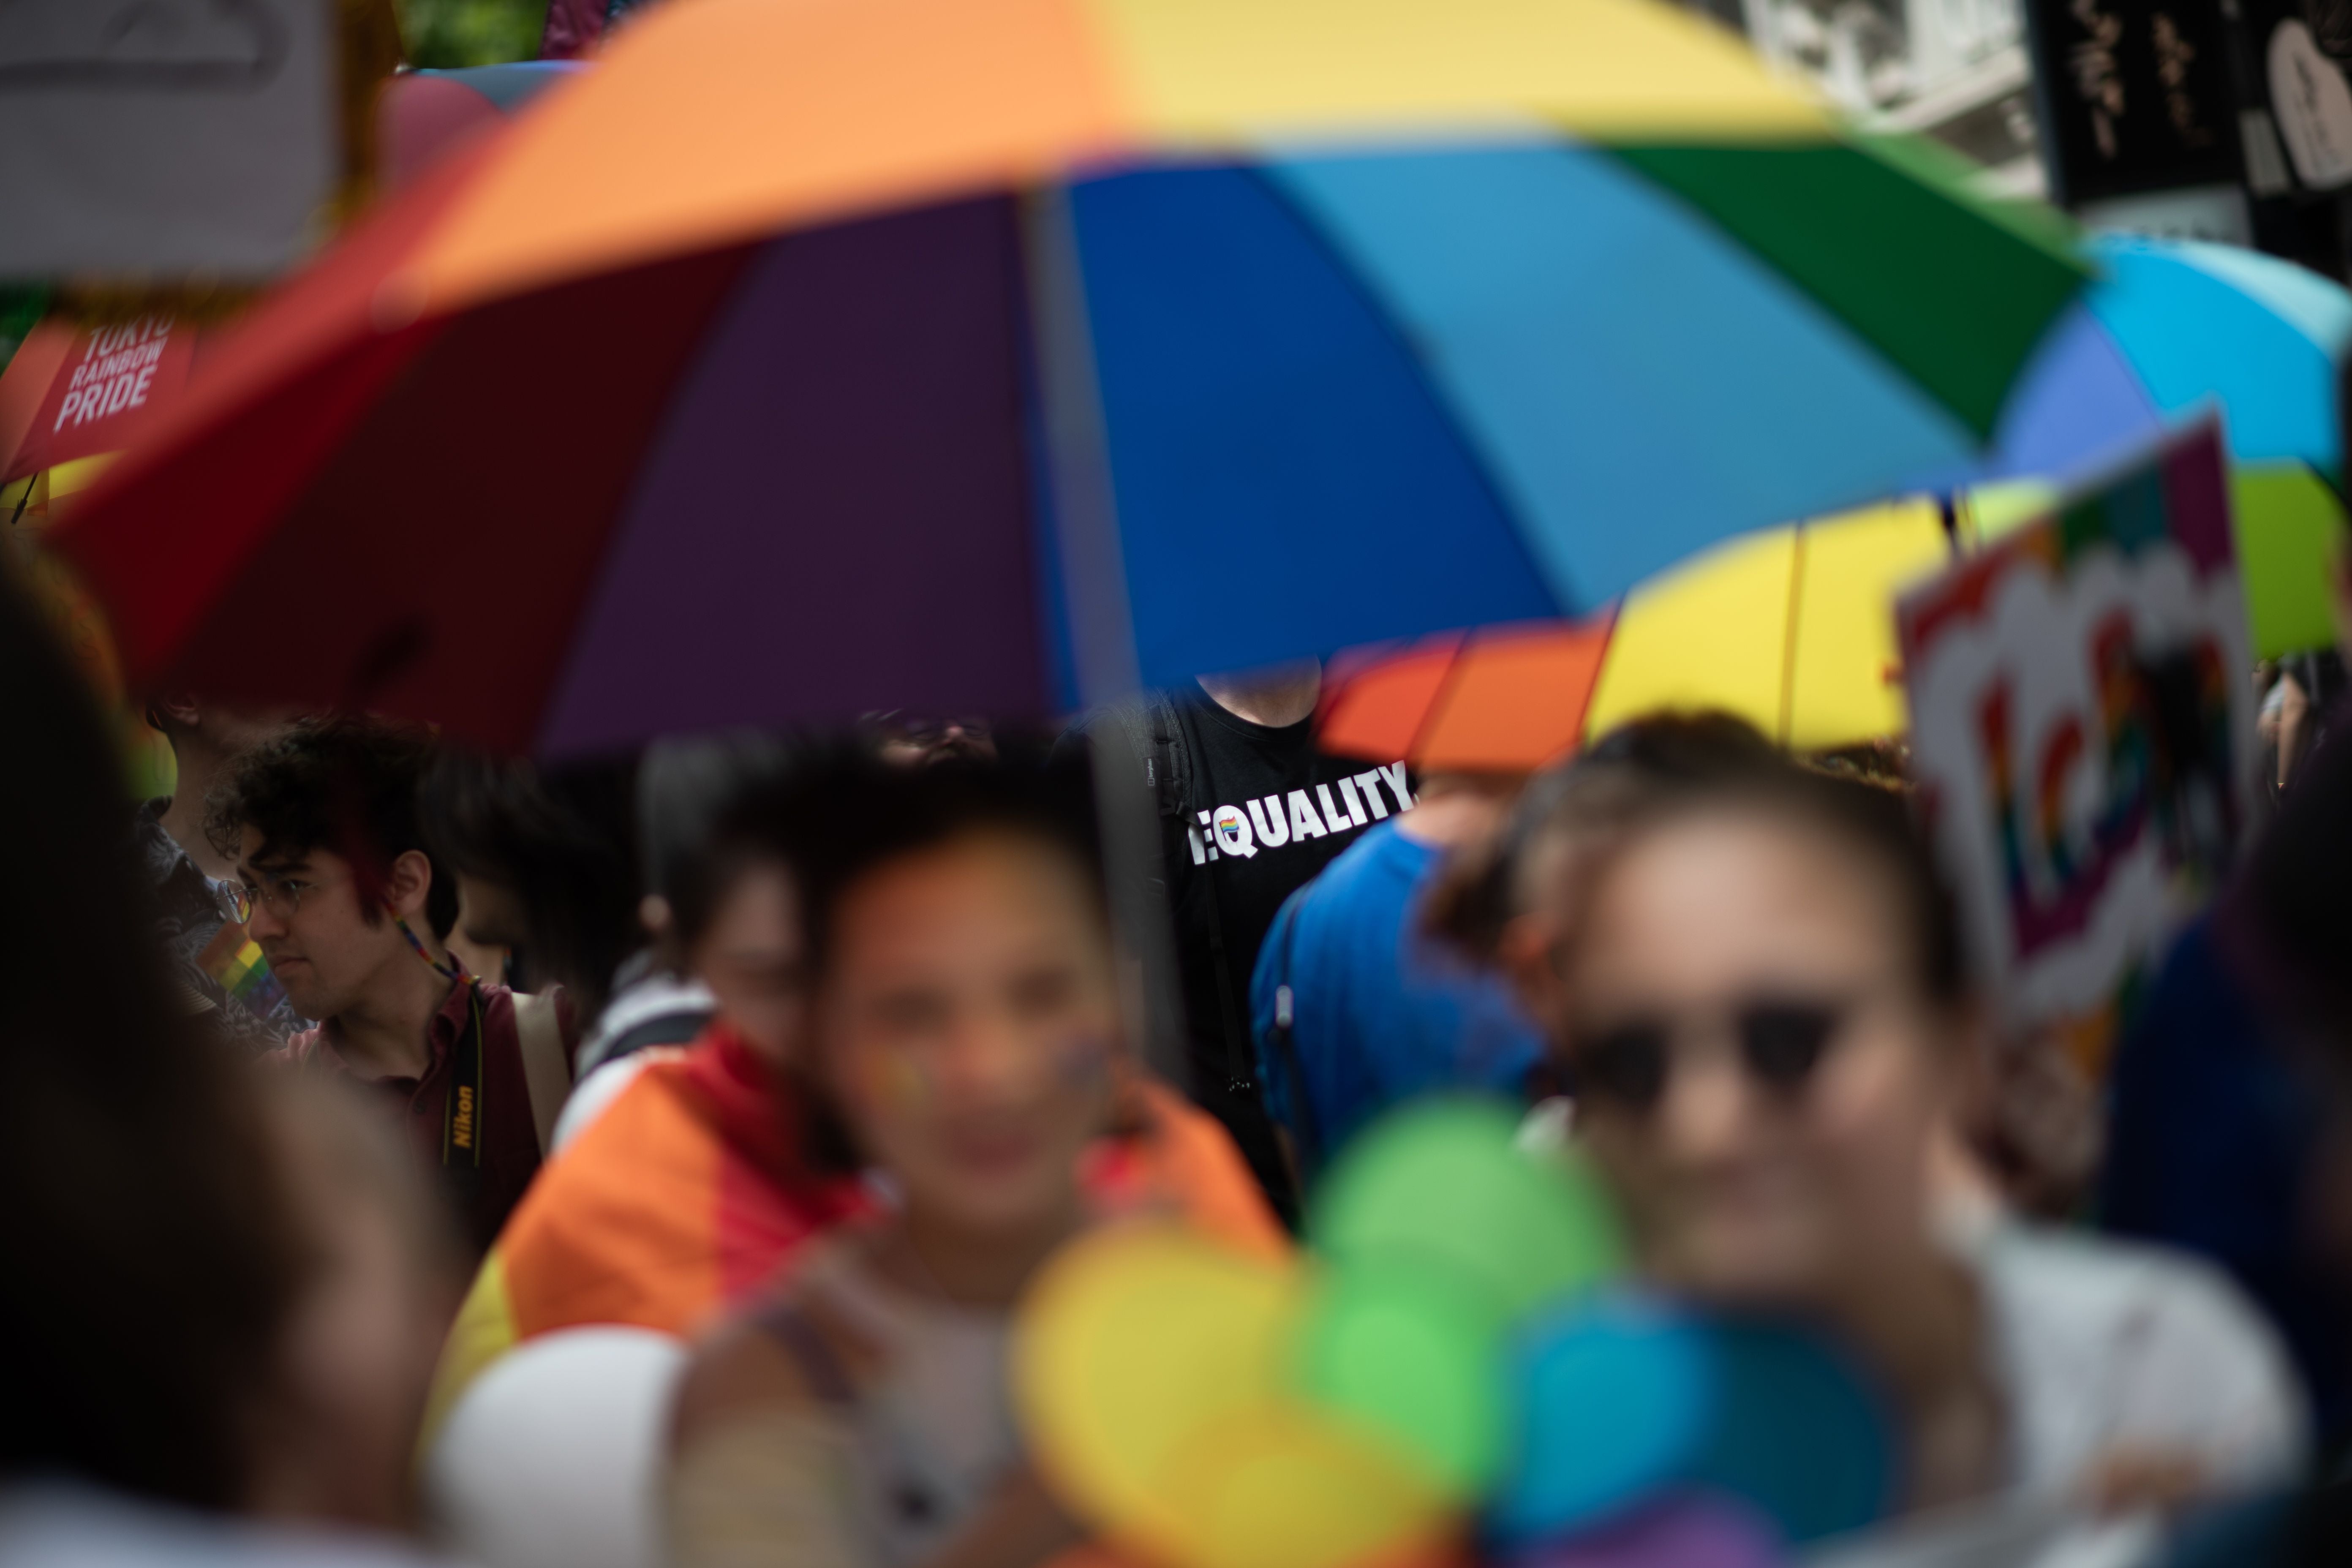 File: People attend the annual Tokyo Rainbow Parade in Tokyo to show support for members of the LGBT community